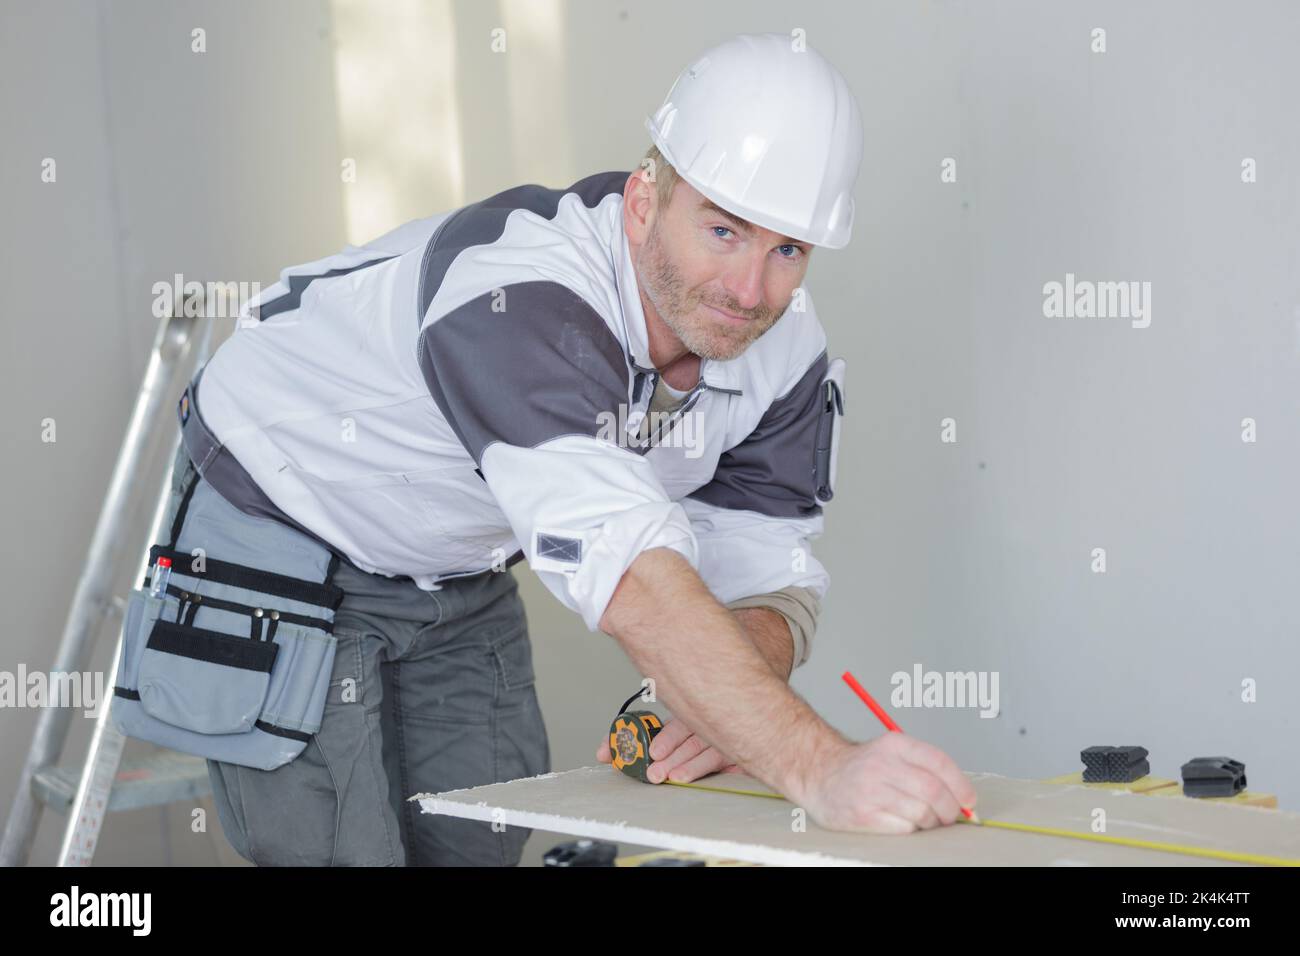 man carpenter working on a projet Stock Photo